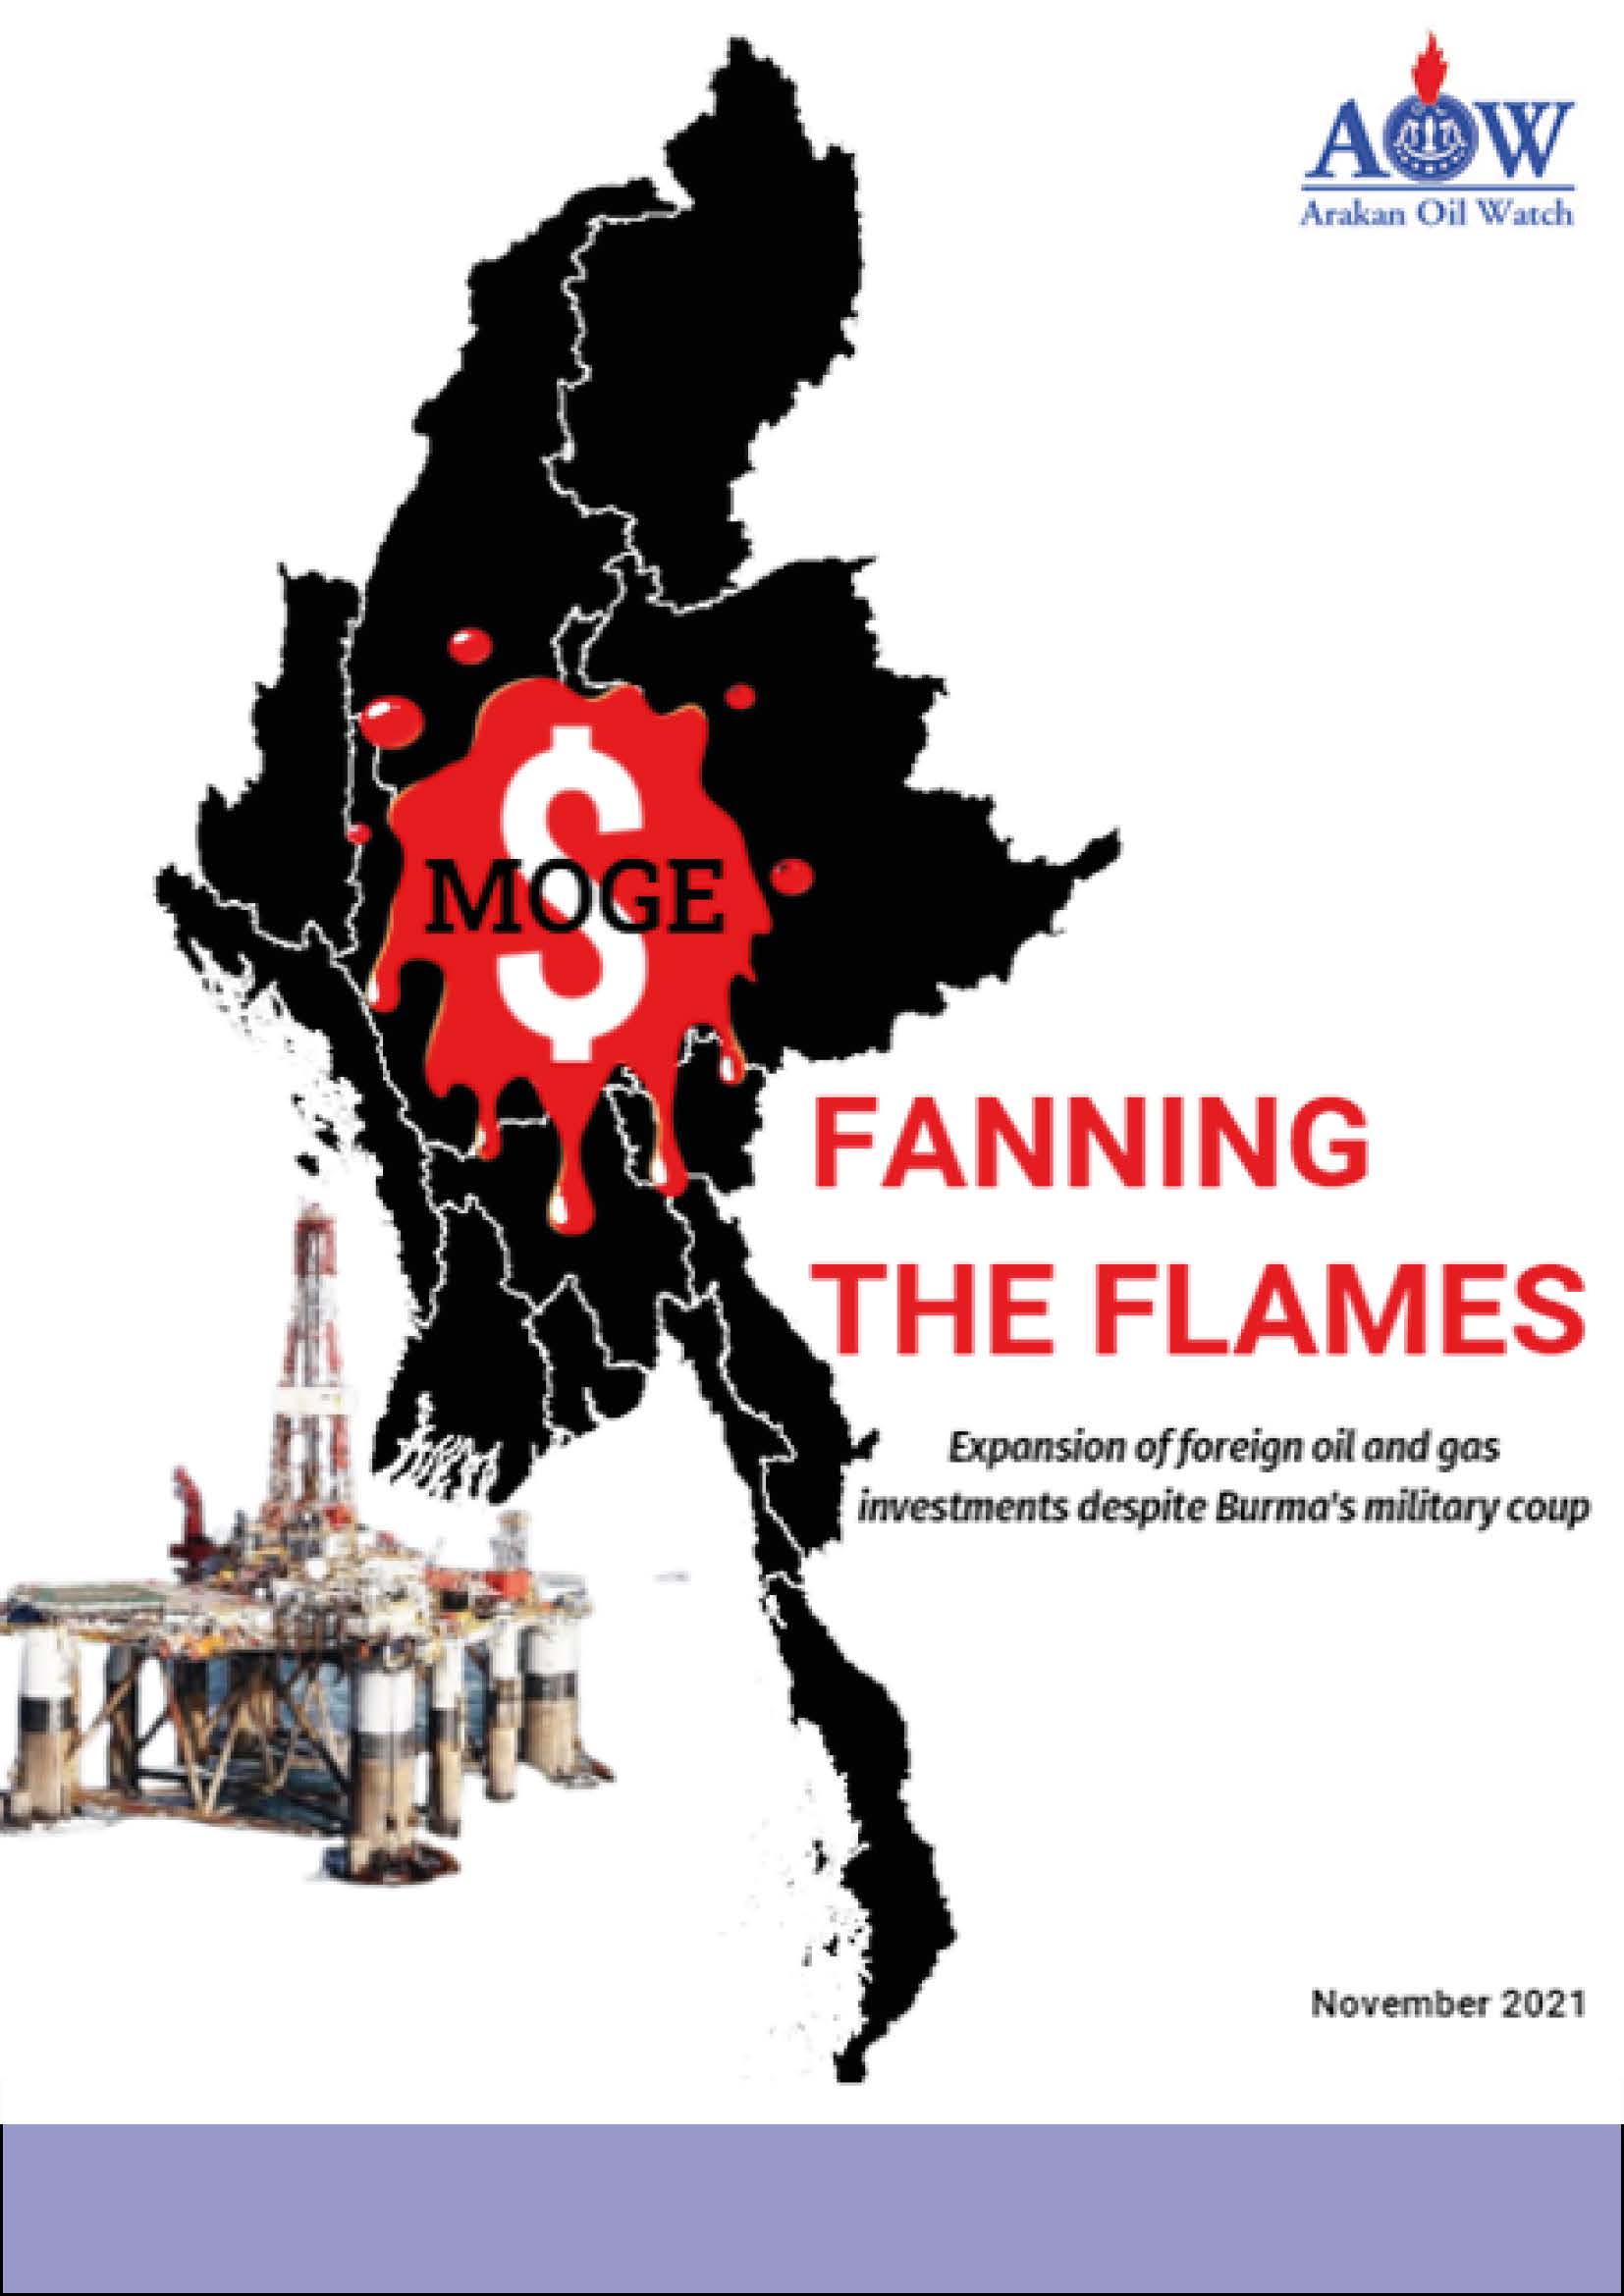 Fanning the flames: Expansion of foreign oil and gas investments despite Burma’s military coup